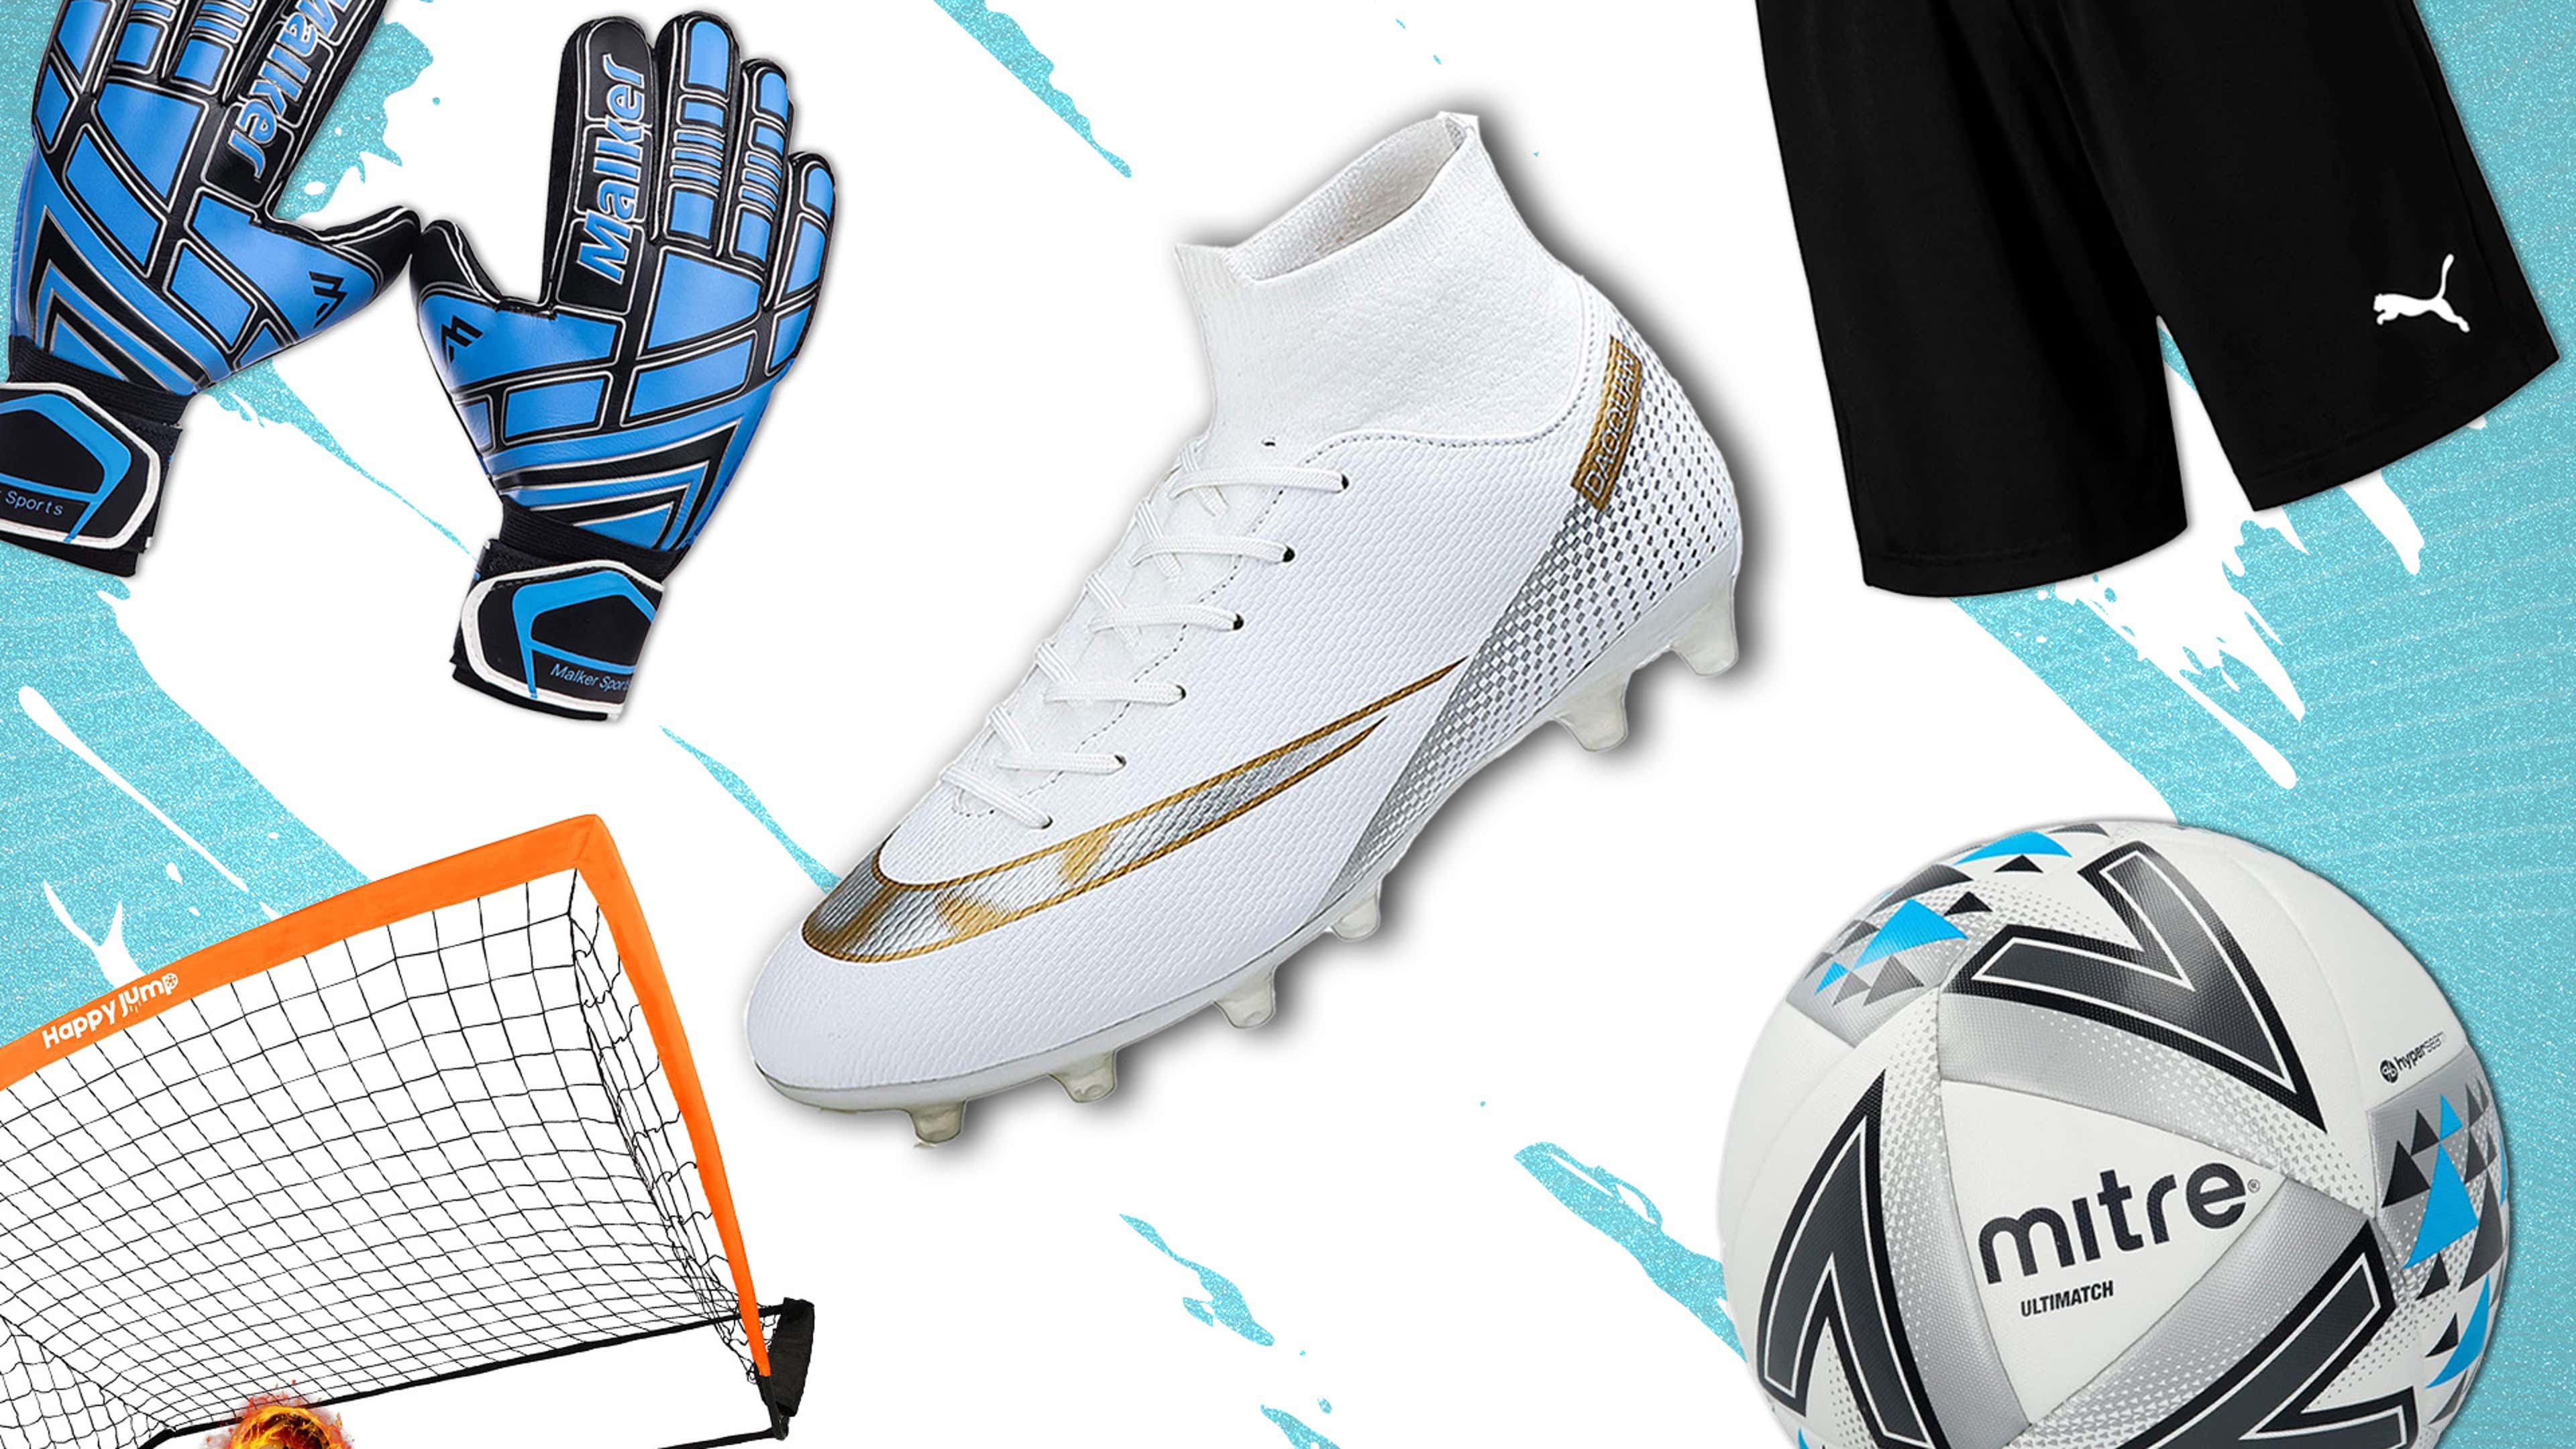 Prime Day 2022: The best deals on football gear